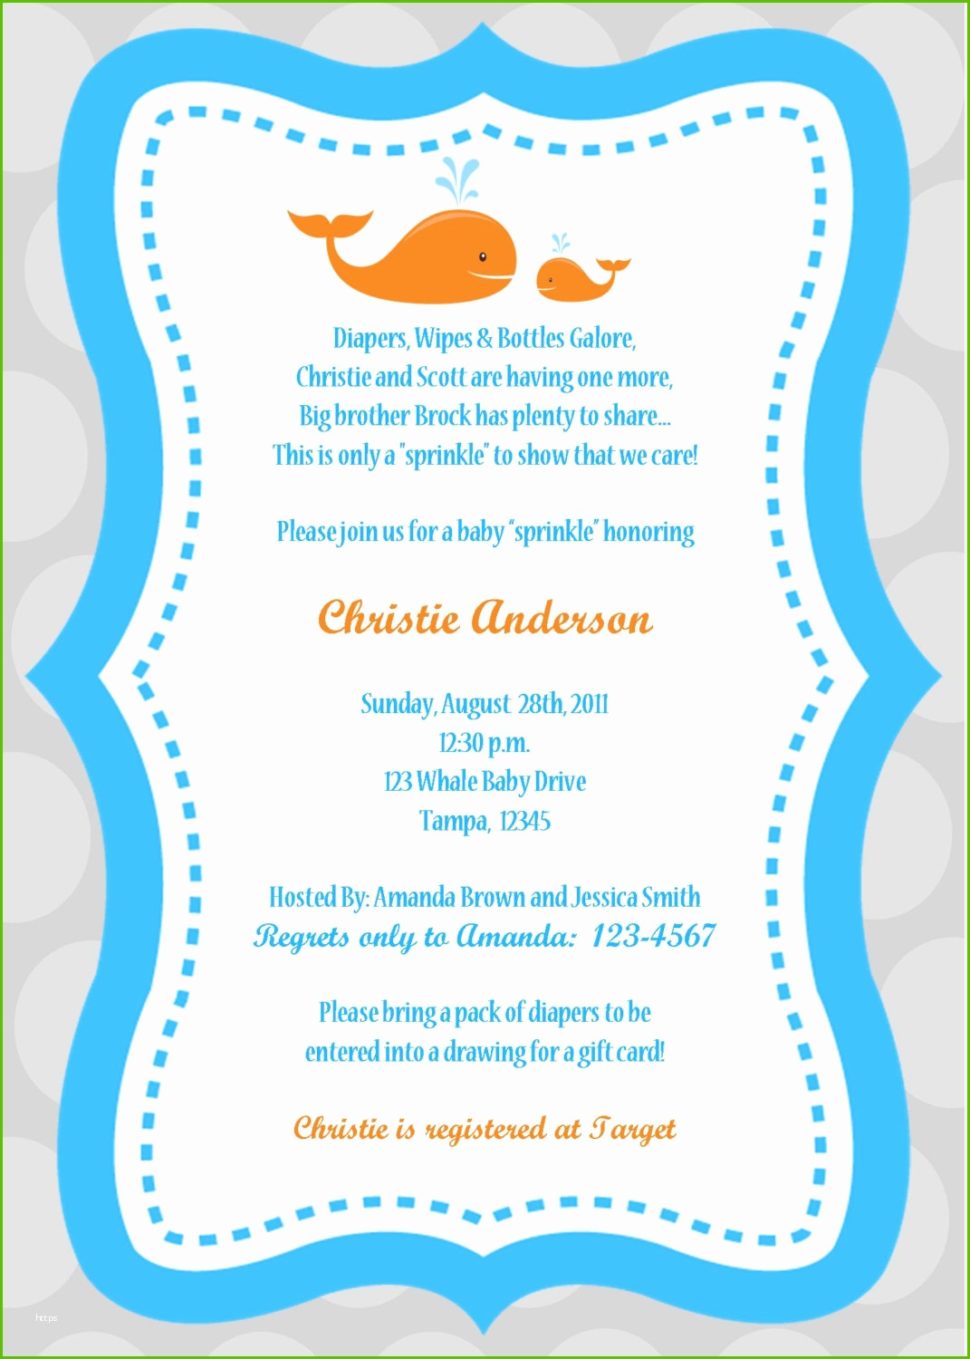 Medium Size of Baby Shower:delightful Baby Shower Invitation Wording Picture Designs Baby Shower Invitation Wording Who To Invite To Baby Shower Astonishing Baby Shower Invitation Wording For A Boy